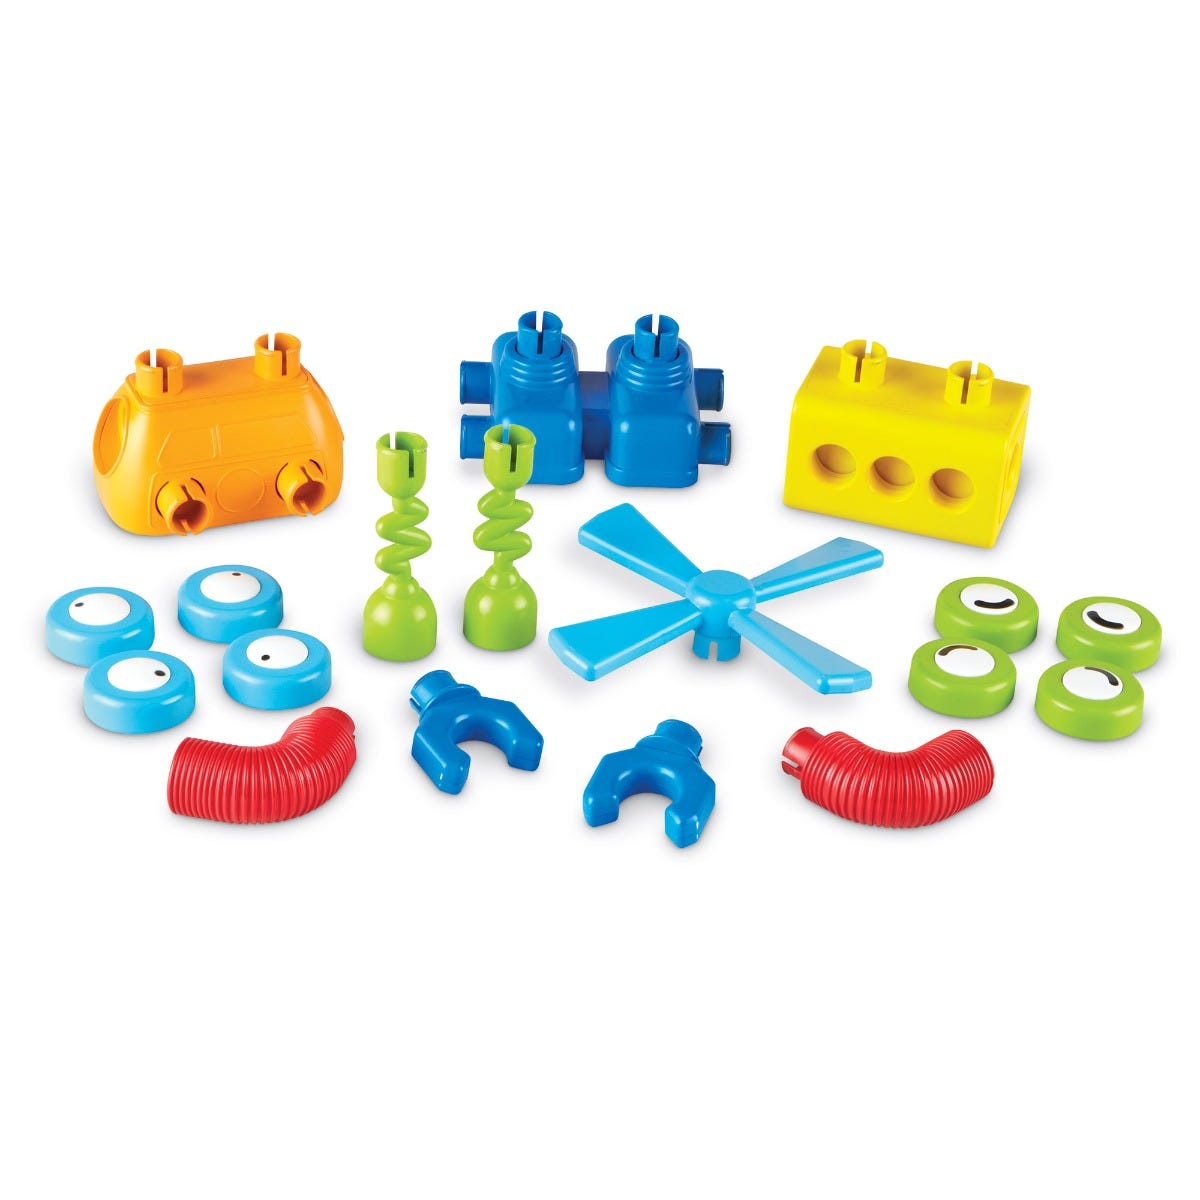 1-2-3 Build It™ Robot Factory, Introducing the 1-2-3 Build It™ Robot Factory, where your child can let their imagination run wild and build their very own twisting, turning, wacky robot creations! This robot construction toy is designed specifically for preschoolers, with chunky plastic pieces that are sized just right for little hands.With the 1-2-3 Build It™ Robot Factory, children can mix, match, fix, attach, and build their robots in endless combinations. Start by building a tall bot with squiggly green